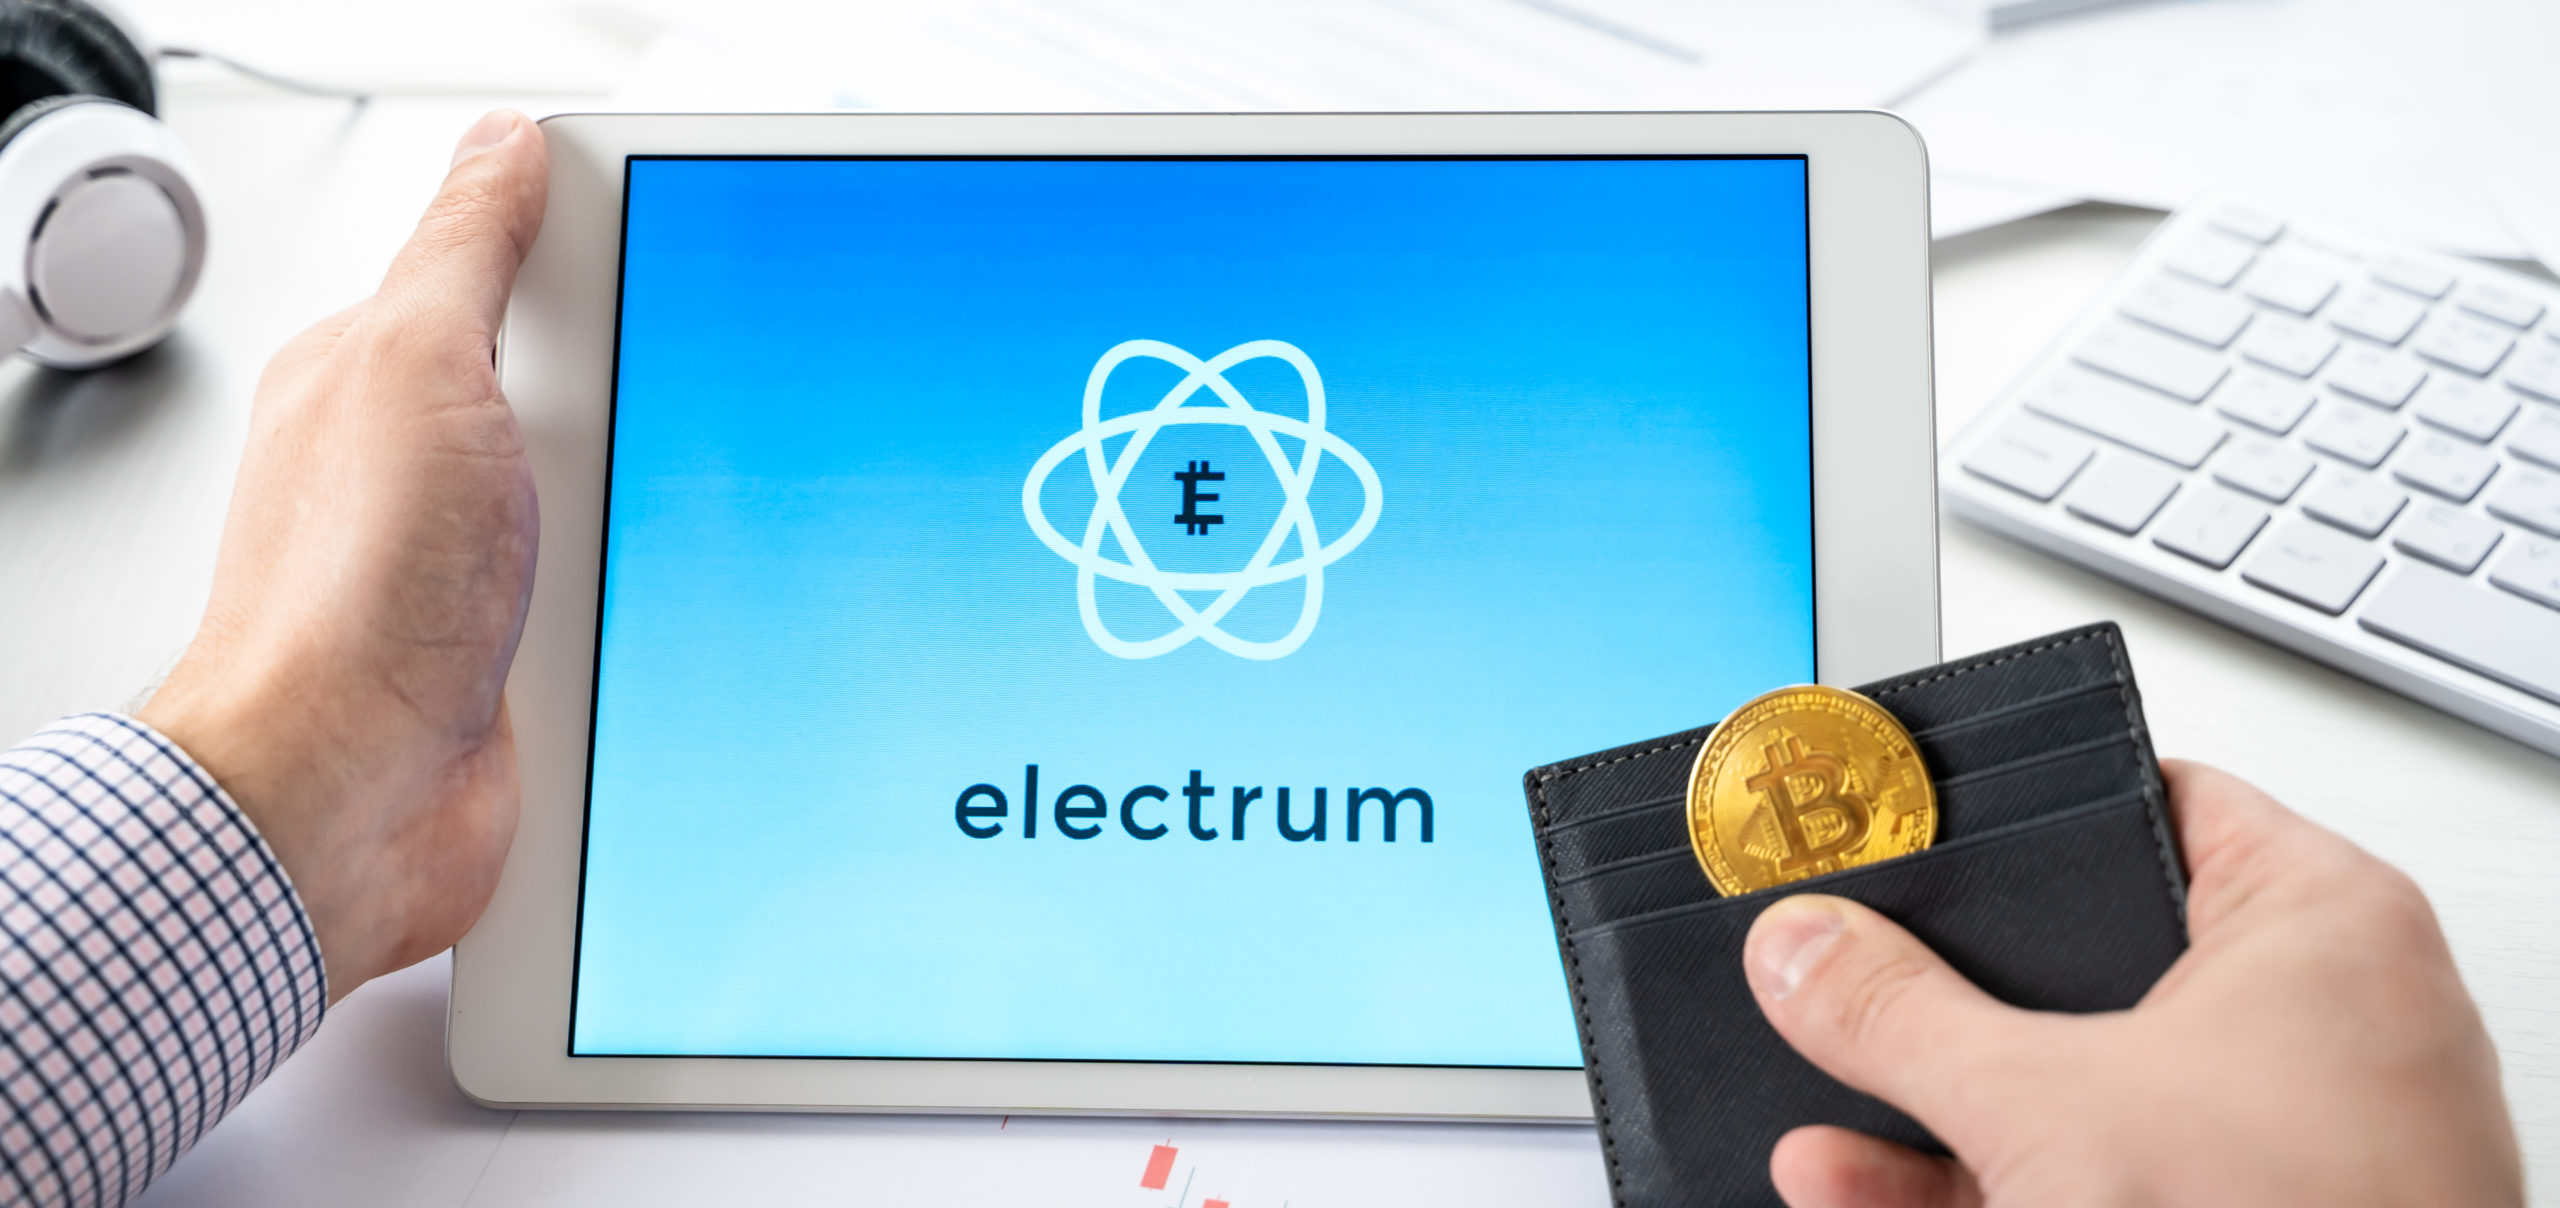 electrum logo displayed on laptop with a wallet and a Bitcoin popping out of it as foreground